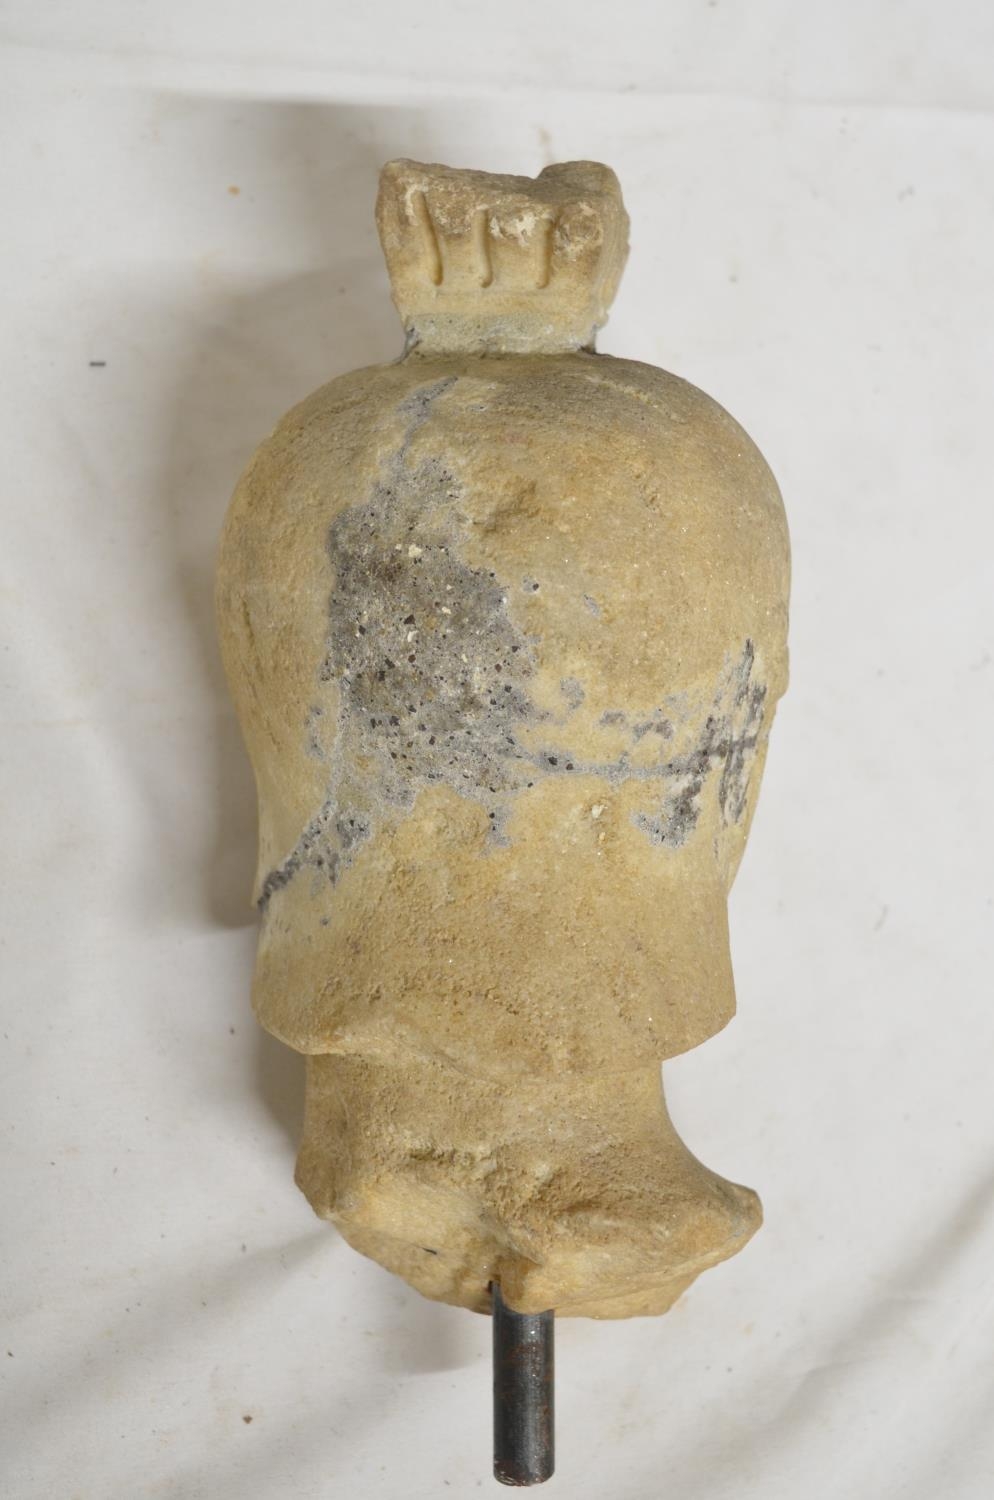 Carved marble head of a Roman soldier, damaged and pieced back together. With vertical stand rod, no - Image 4 of 4